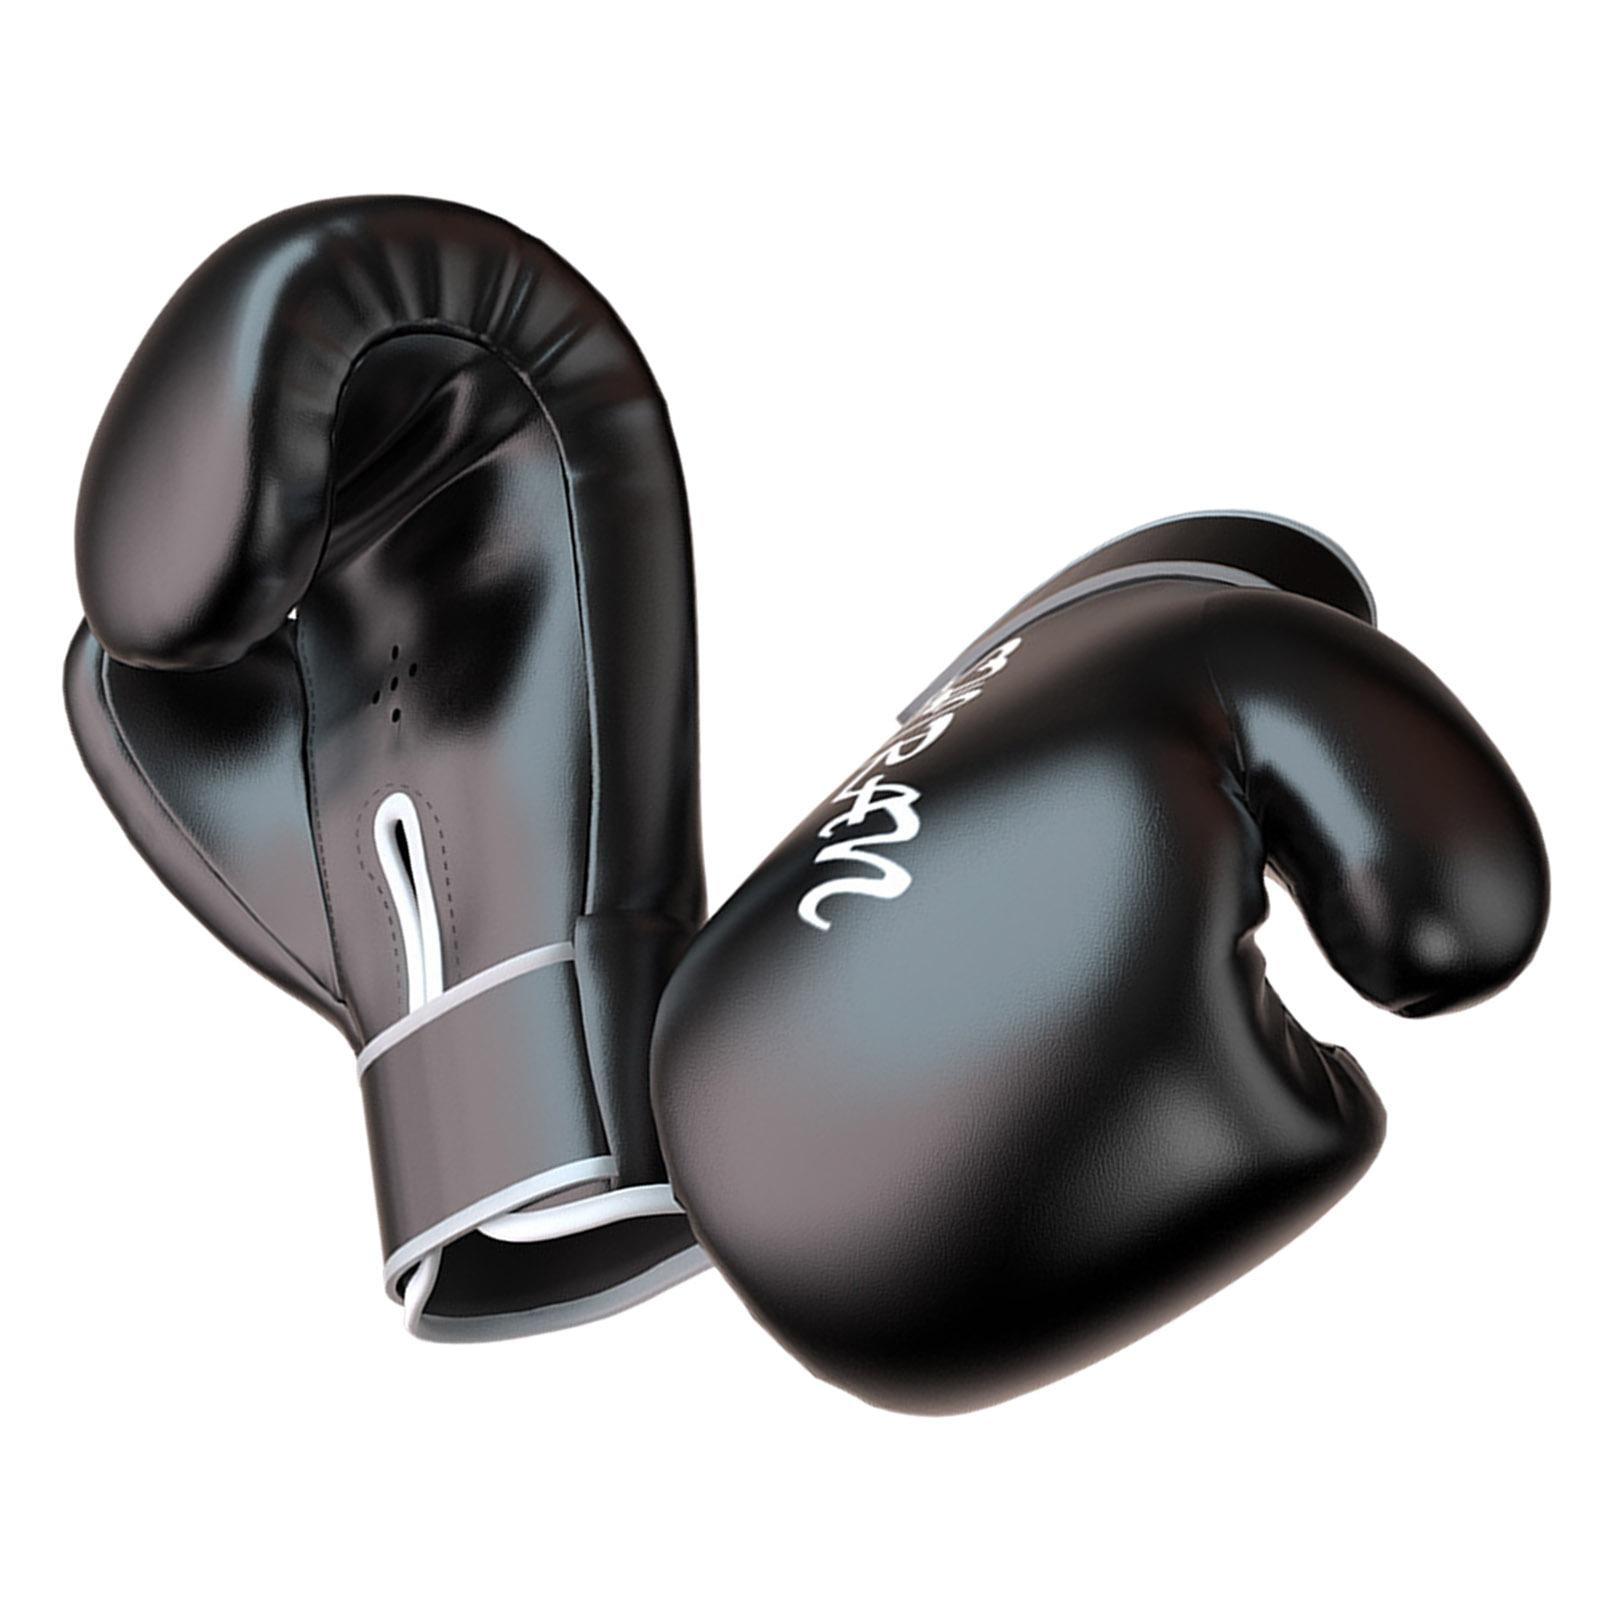 PU Leather Boxing Glove Kickboxing Sparring MMA Muay Thai Punch Mitten 